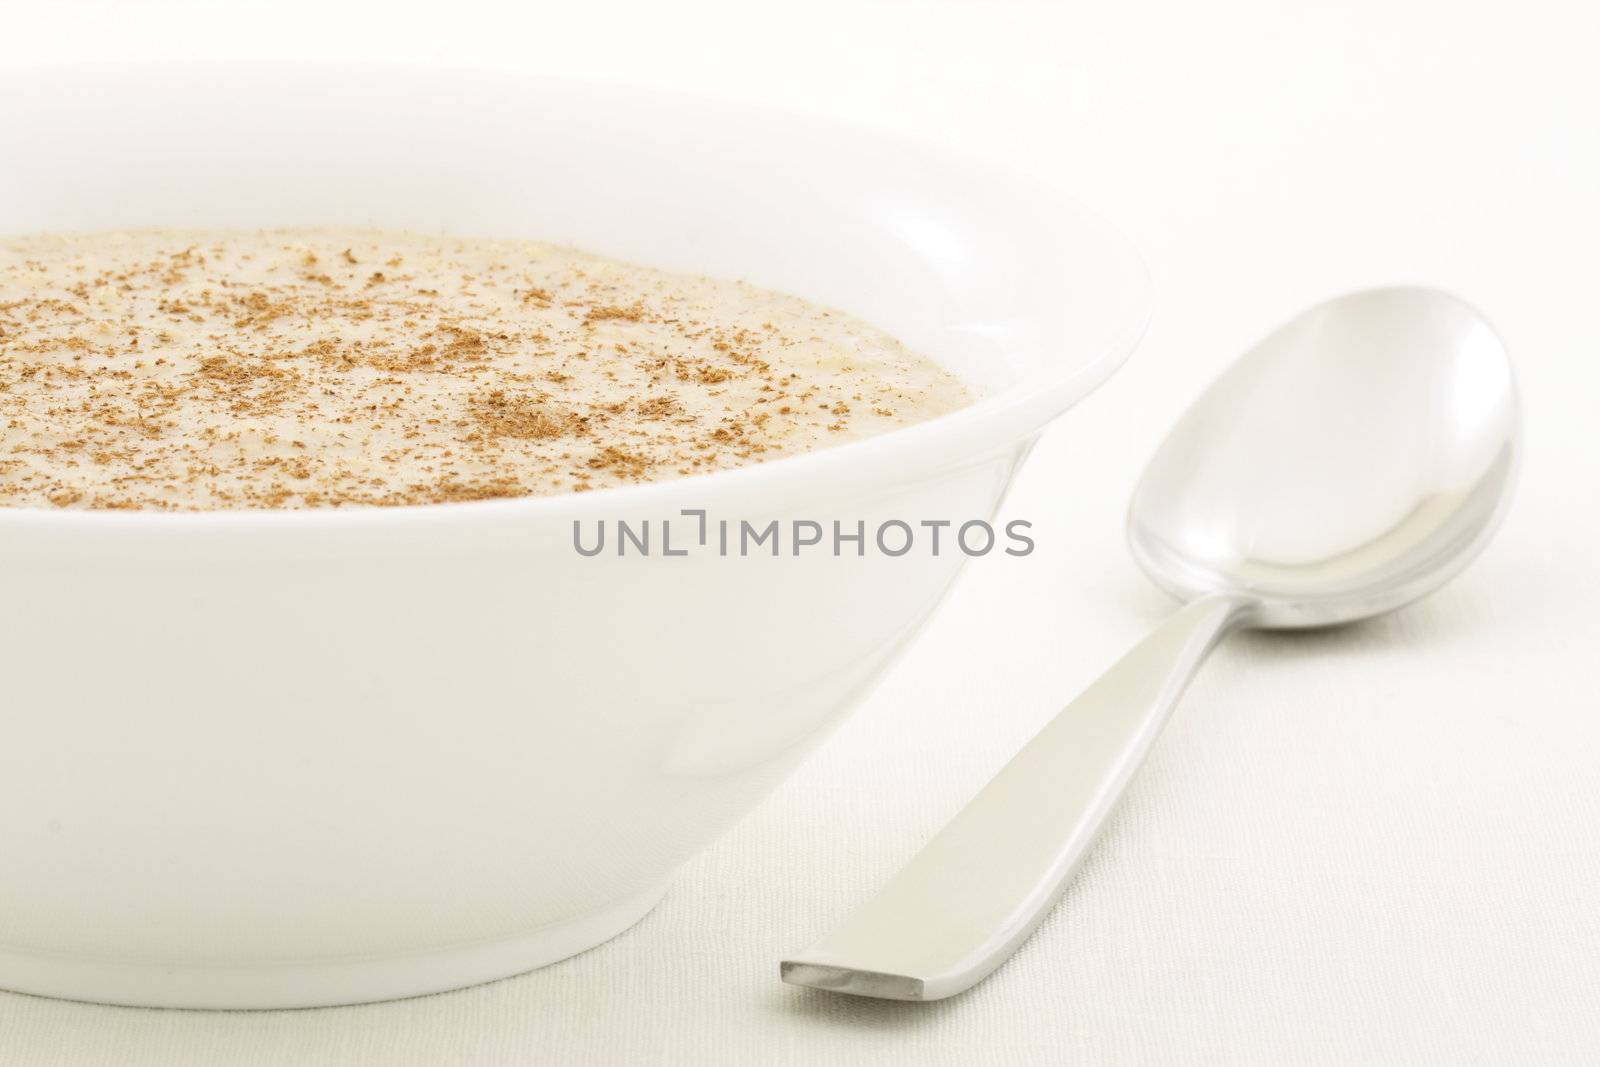 delicious and nutritious bowl of oatmeal, the perfect healthy way to start your day.